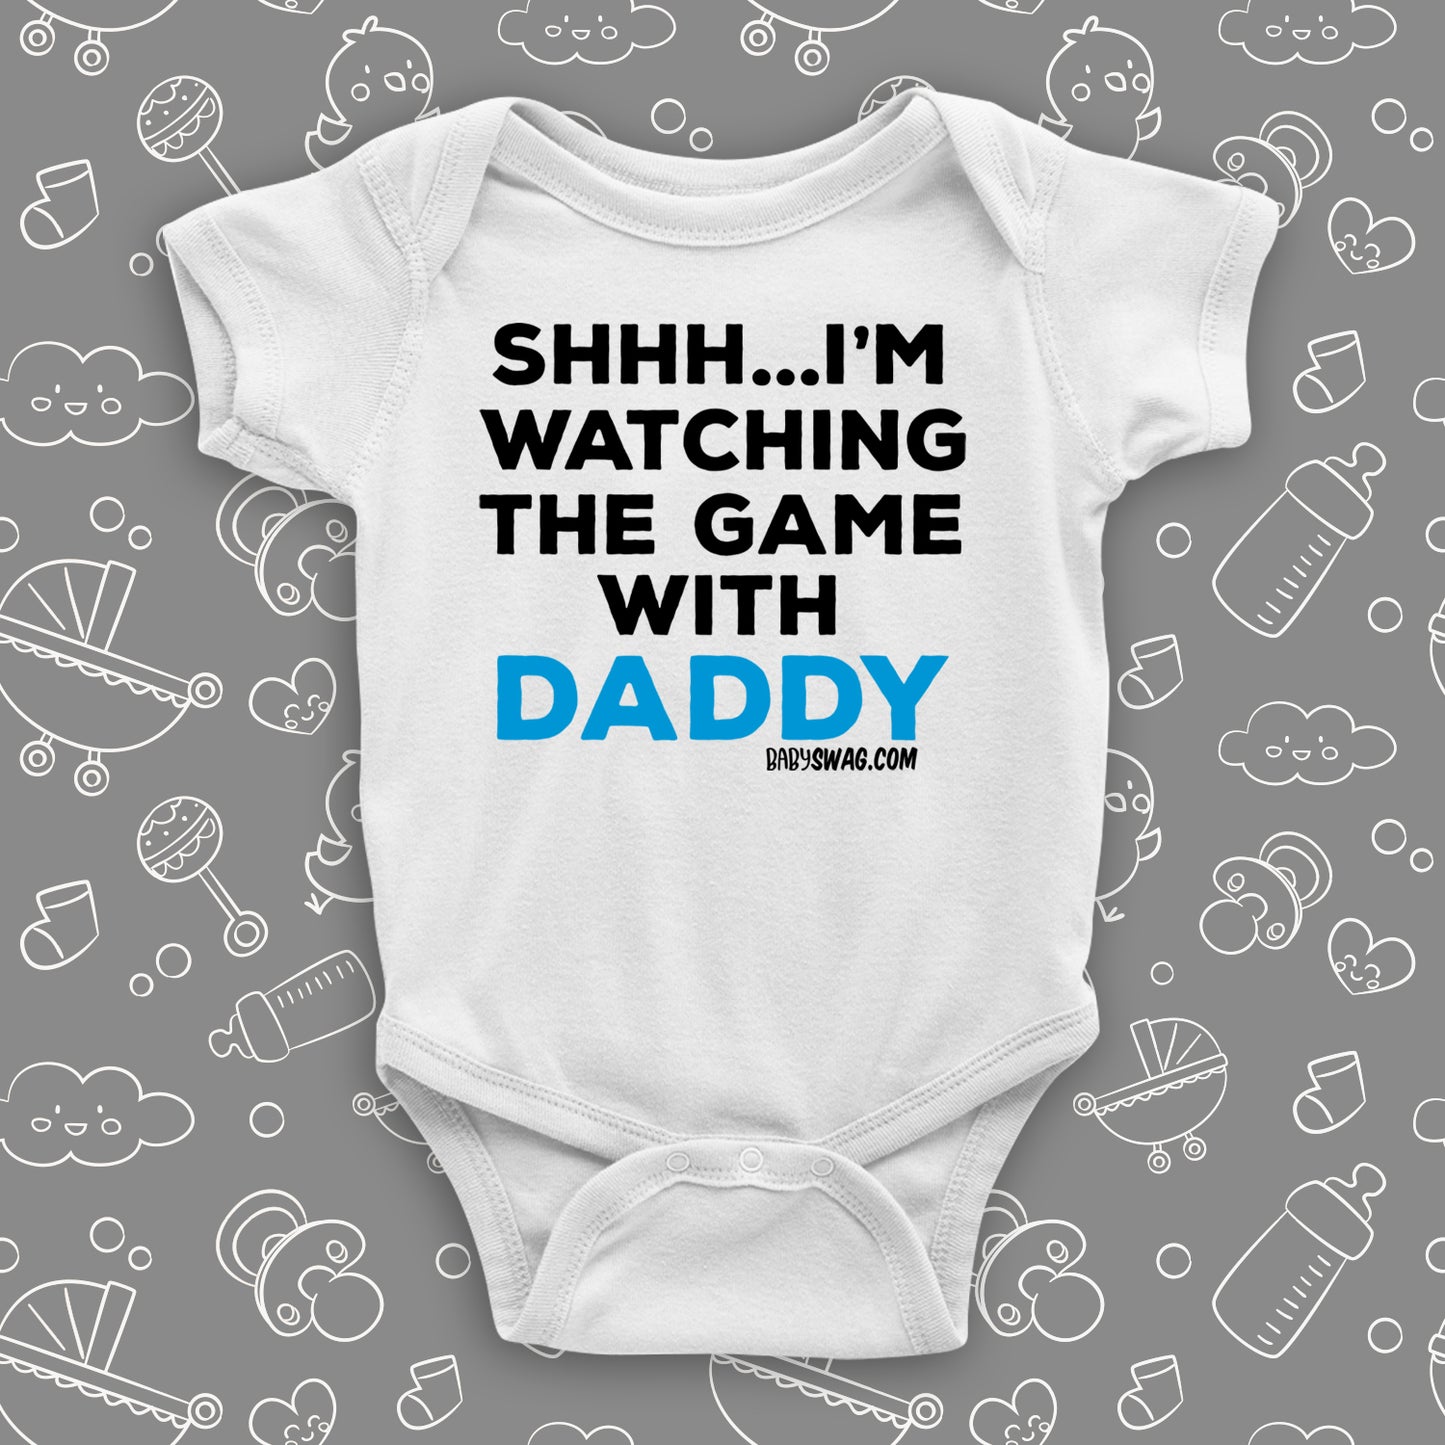 Cool toddler clothes with saying "Shh...I'm Watching The Game With Dad" in white. 